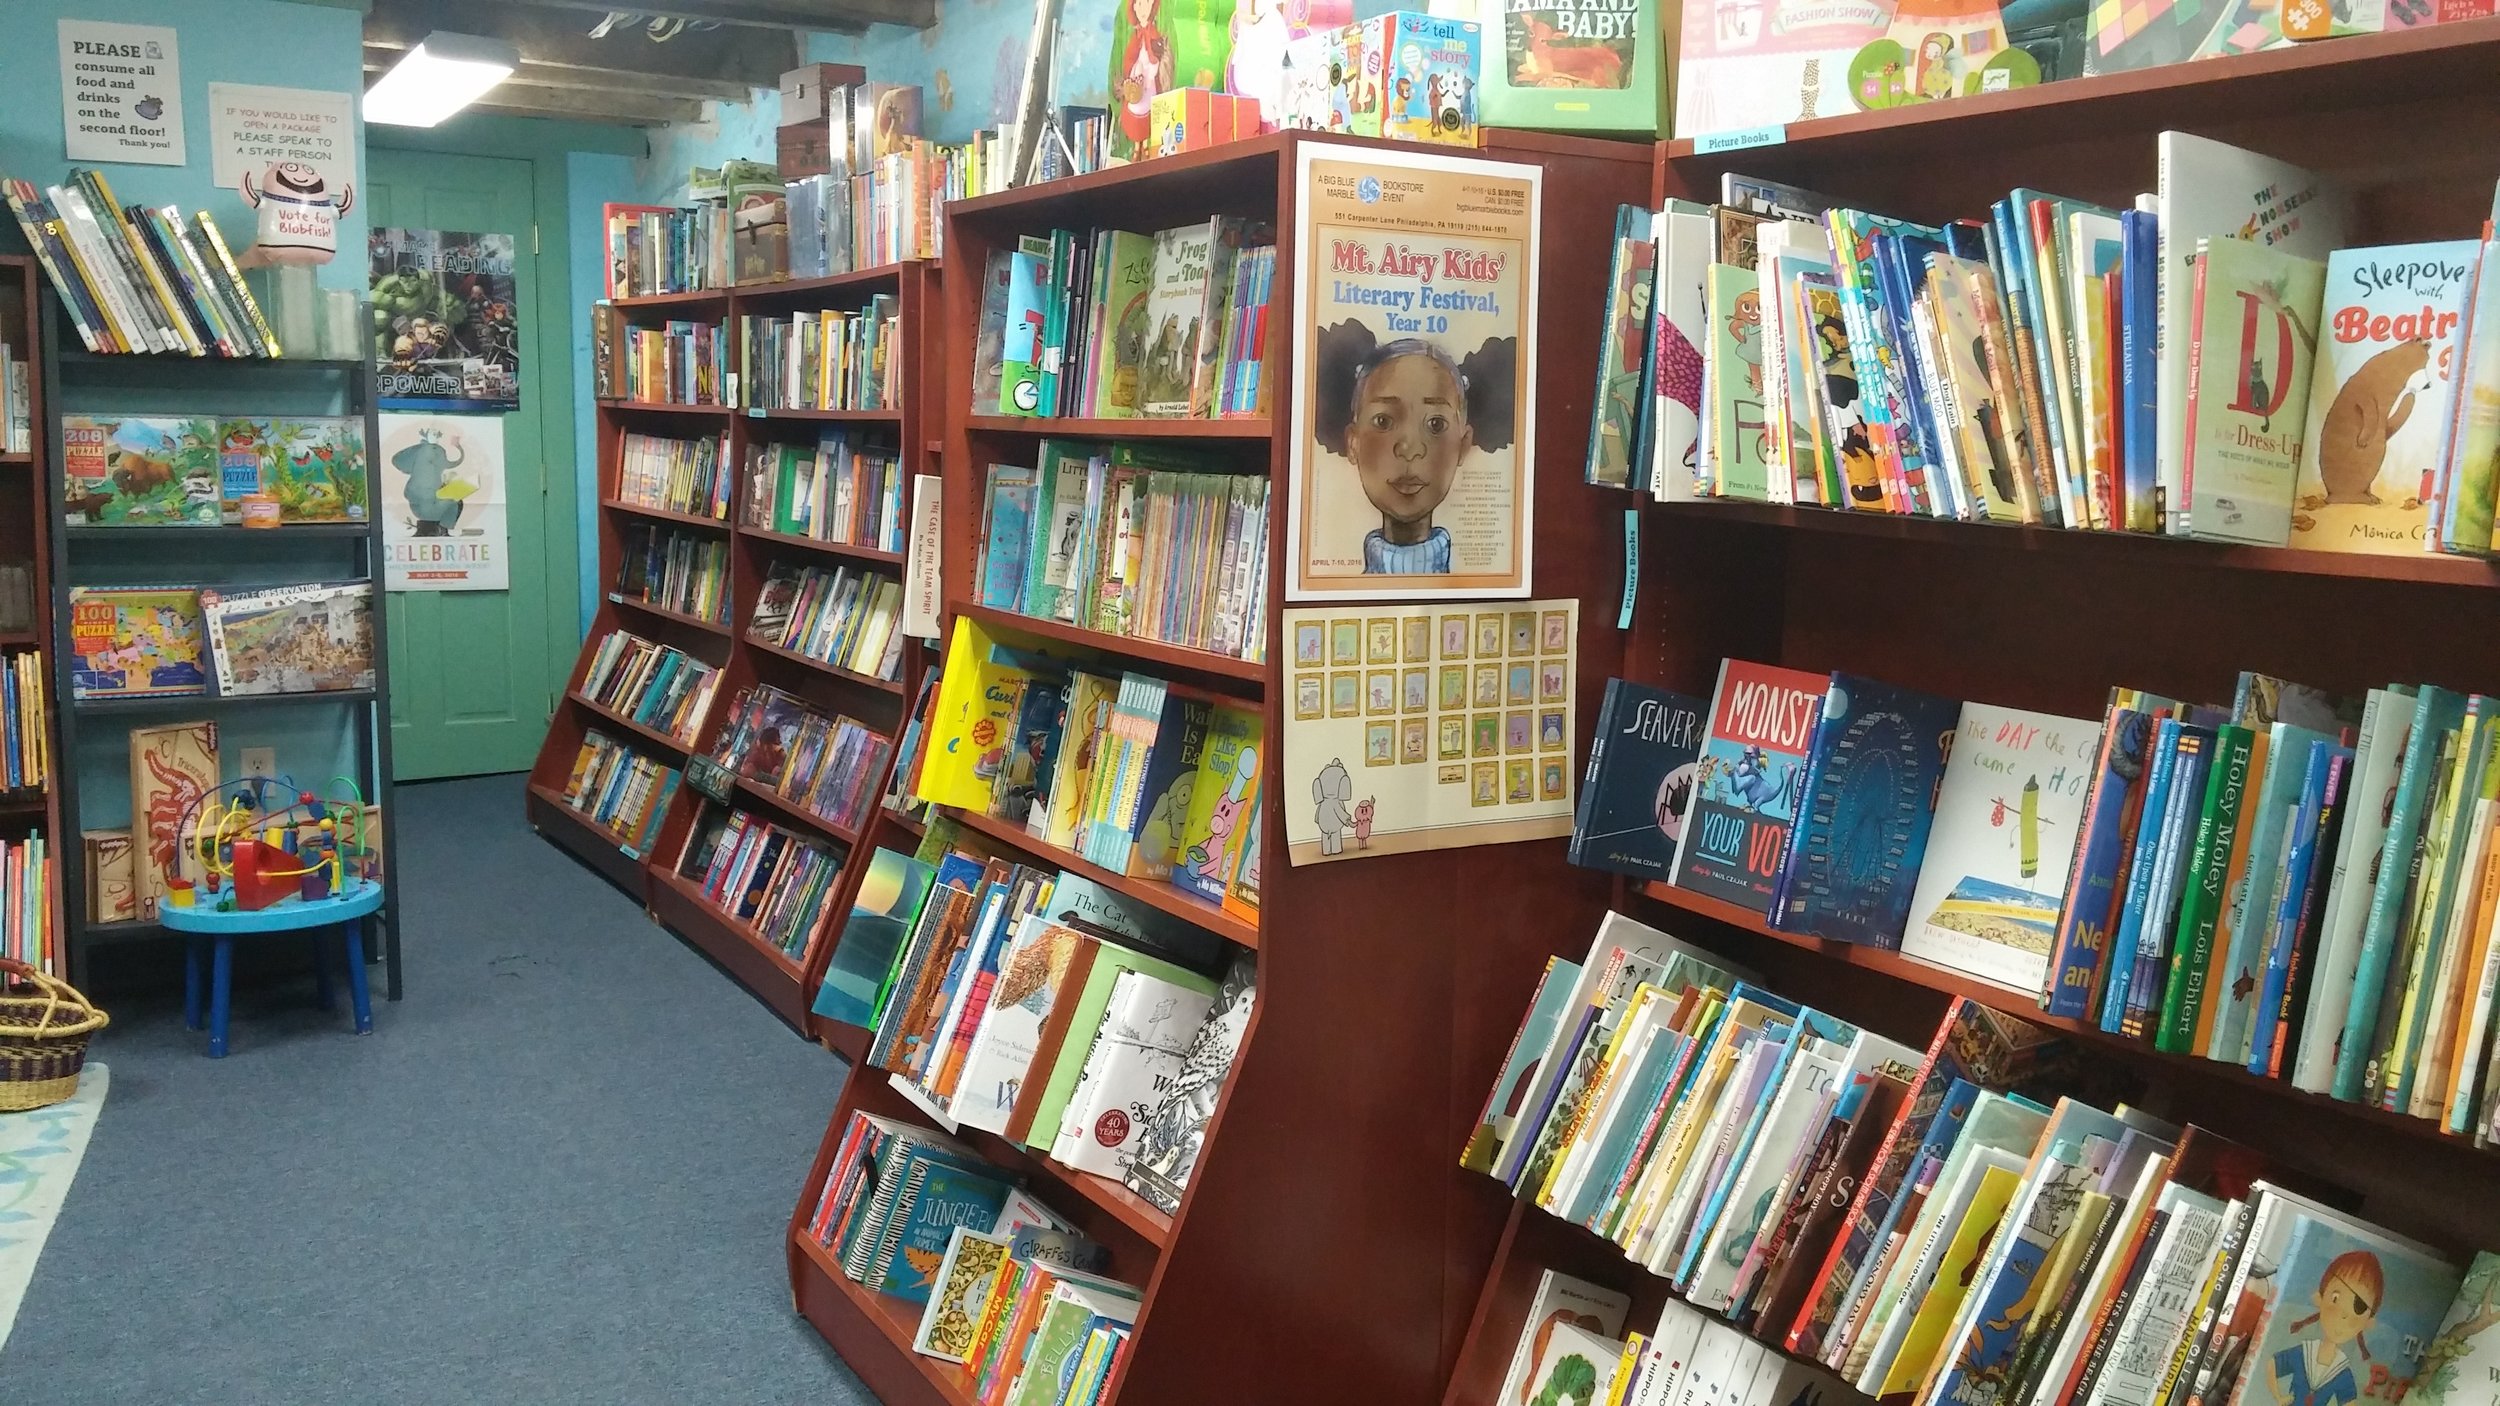 kids area chapter books and picture books.jpg